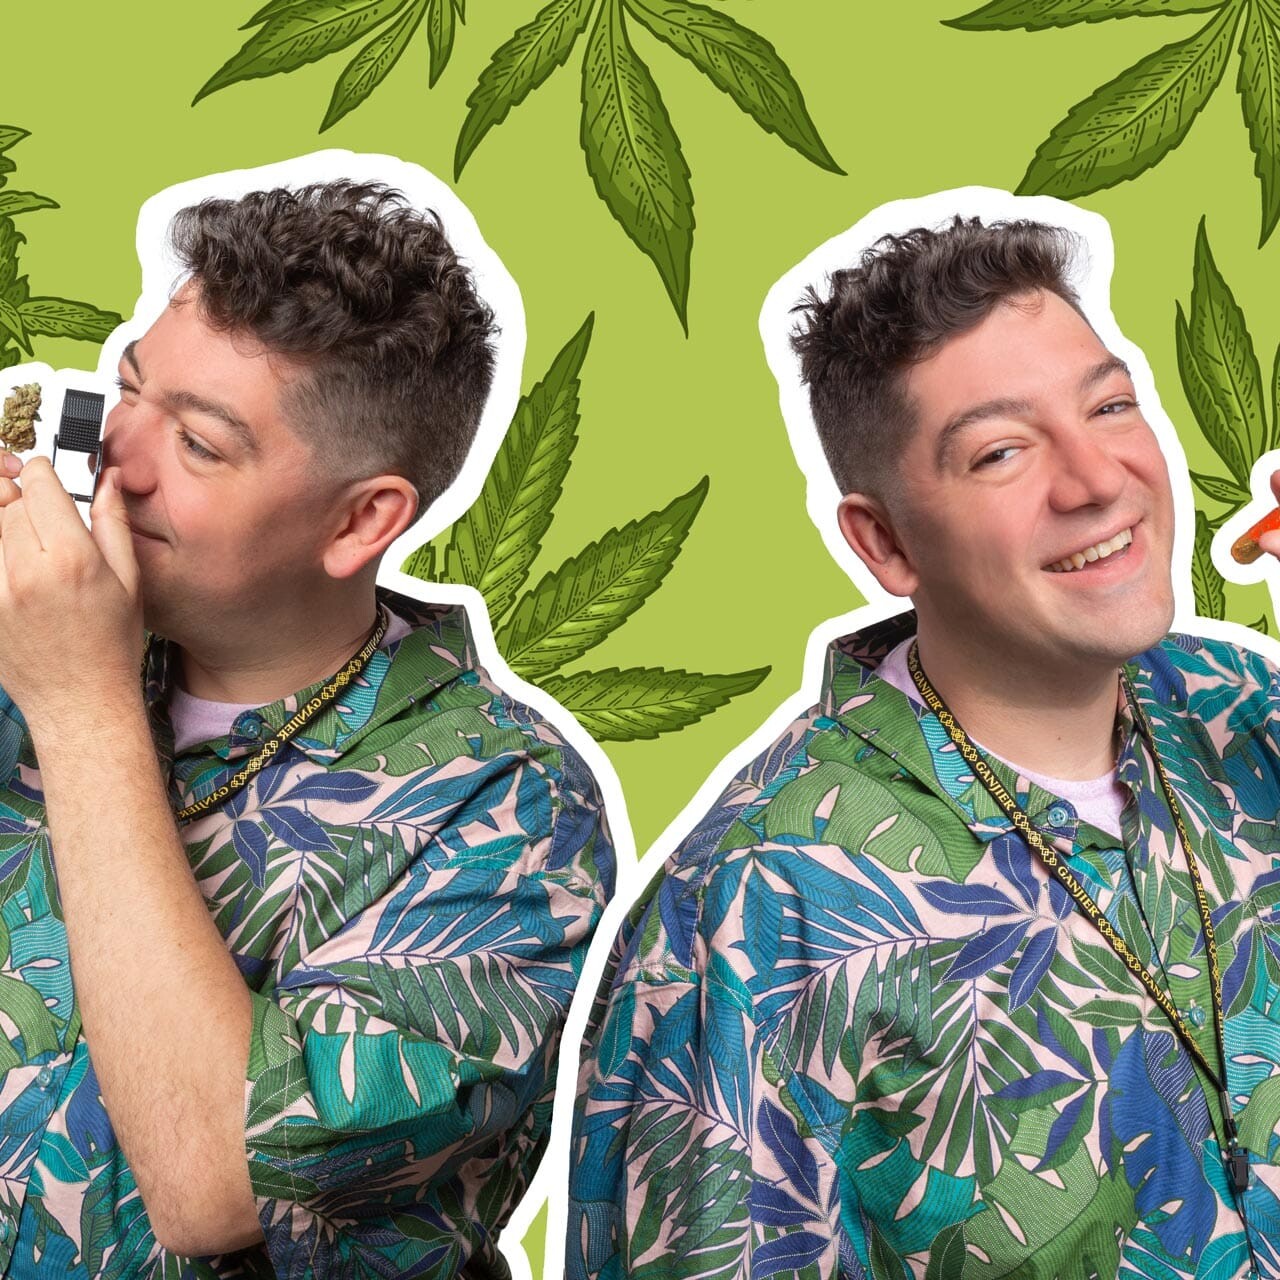 Two images of Lightshade’s Director of Inventory and Purchasing, Zach York, holding cannabis products over an illustrated cannabis background